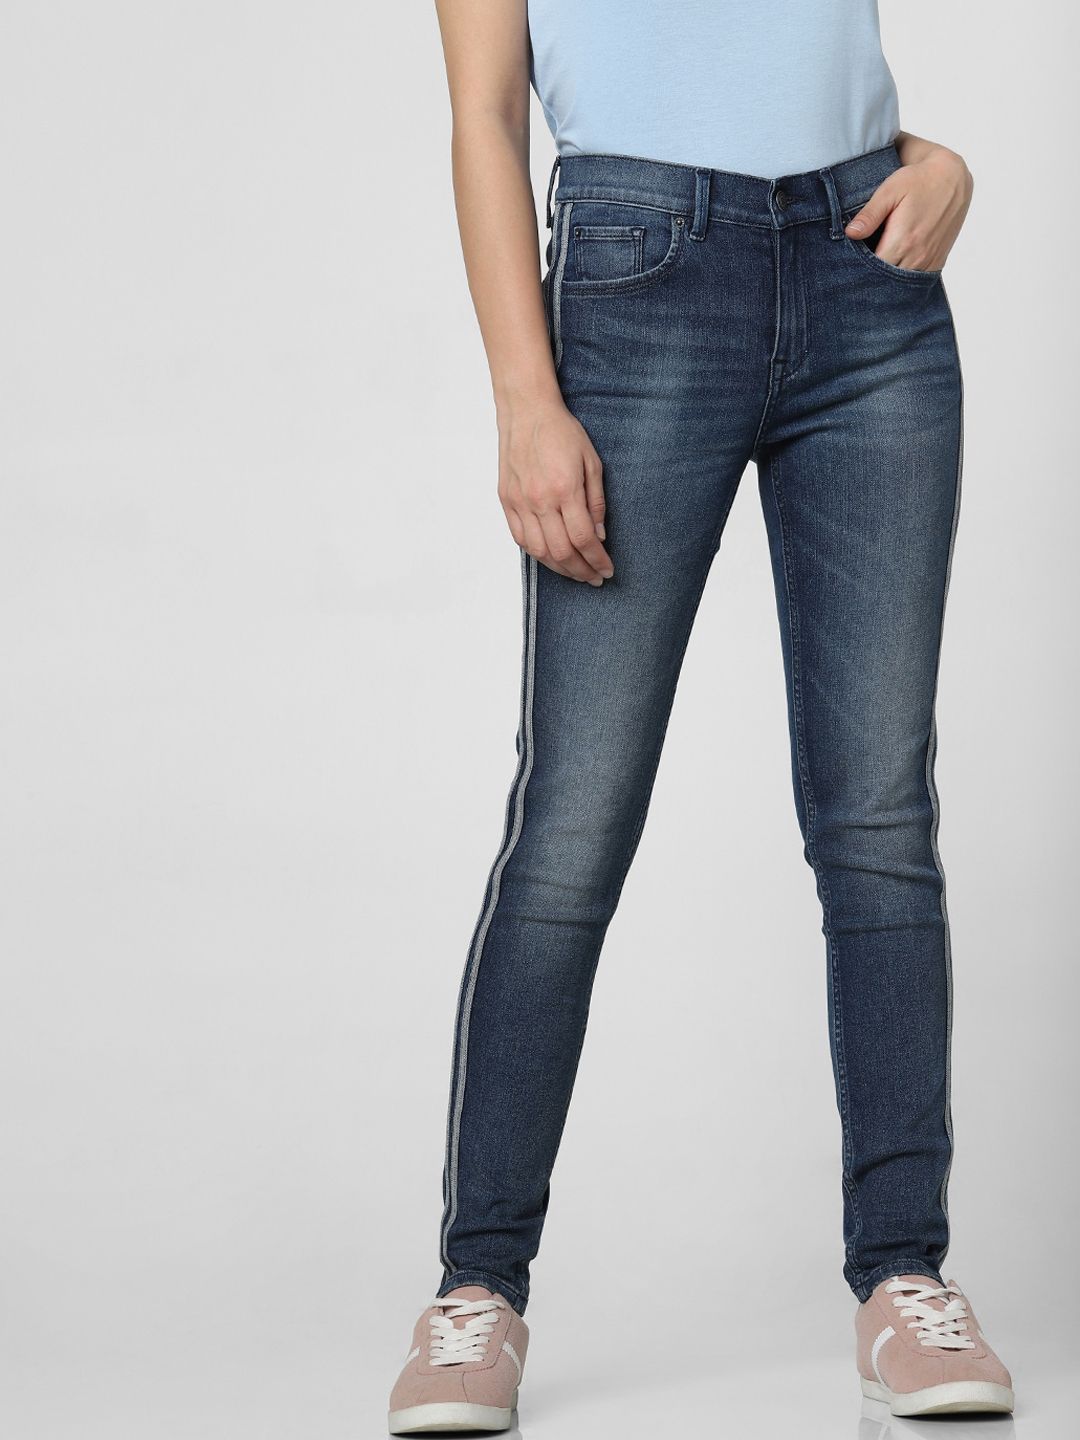 Vero Moda Women Blue Skinny Fit Heavy Fade Stretchable Jeans Price in India